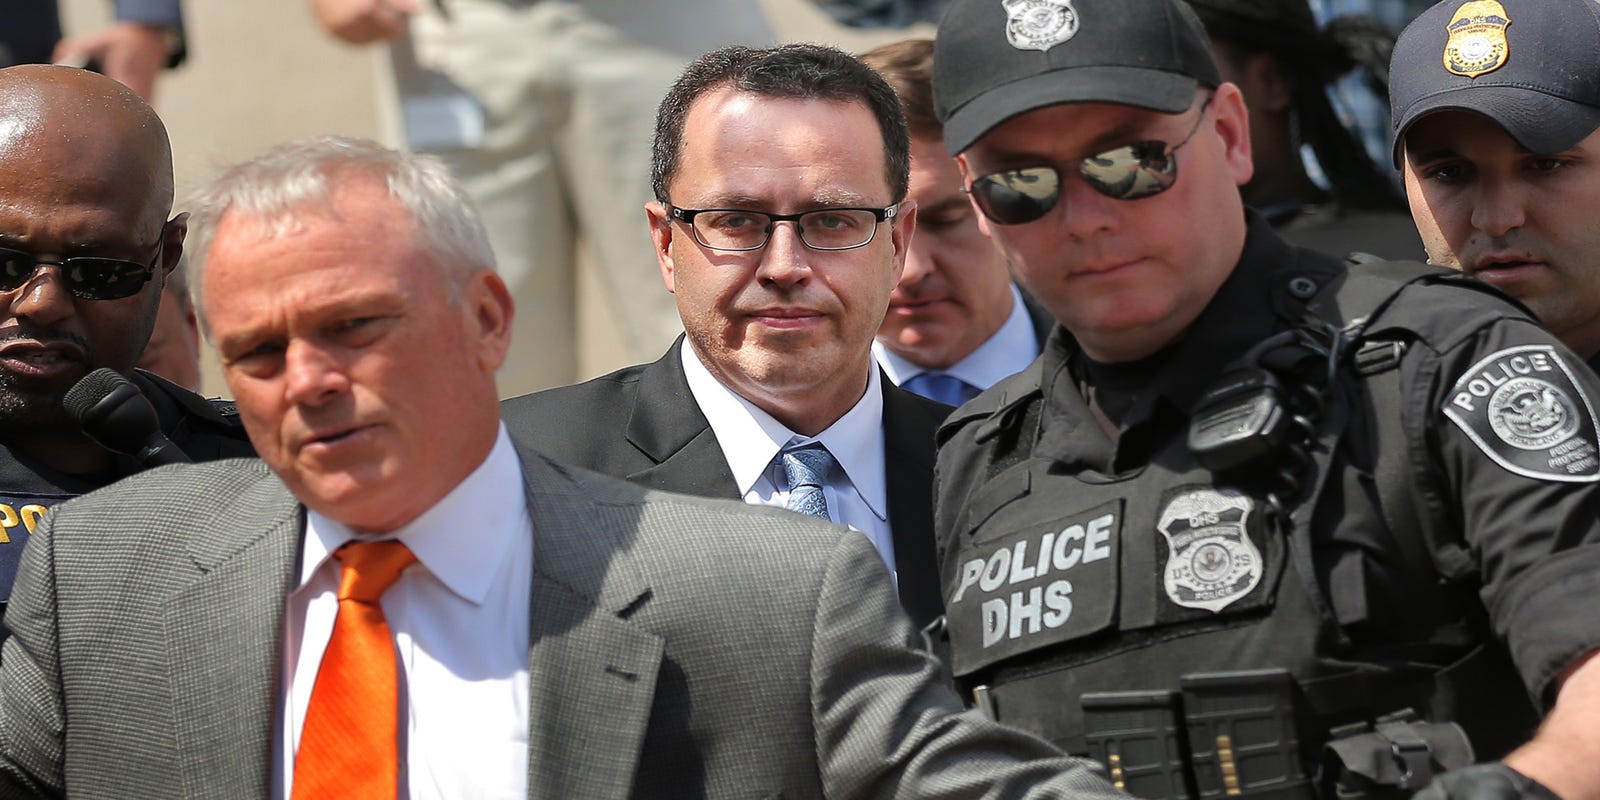 American Middle School Student Porn - Jared Fogle sought out teen sex, child porn